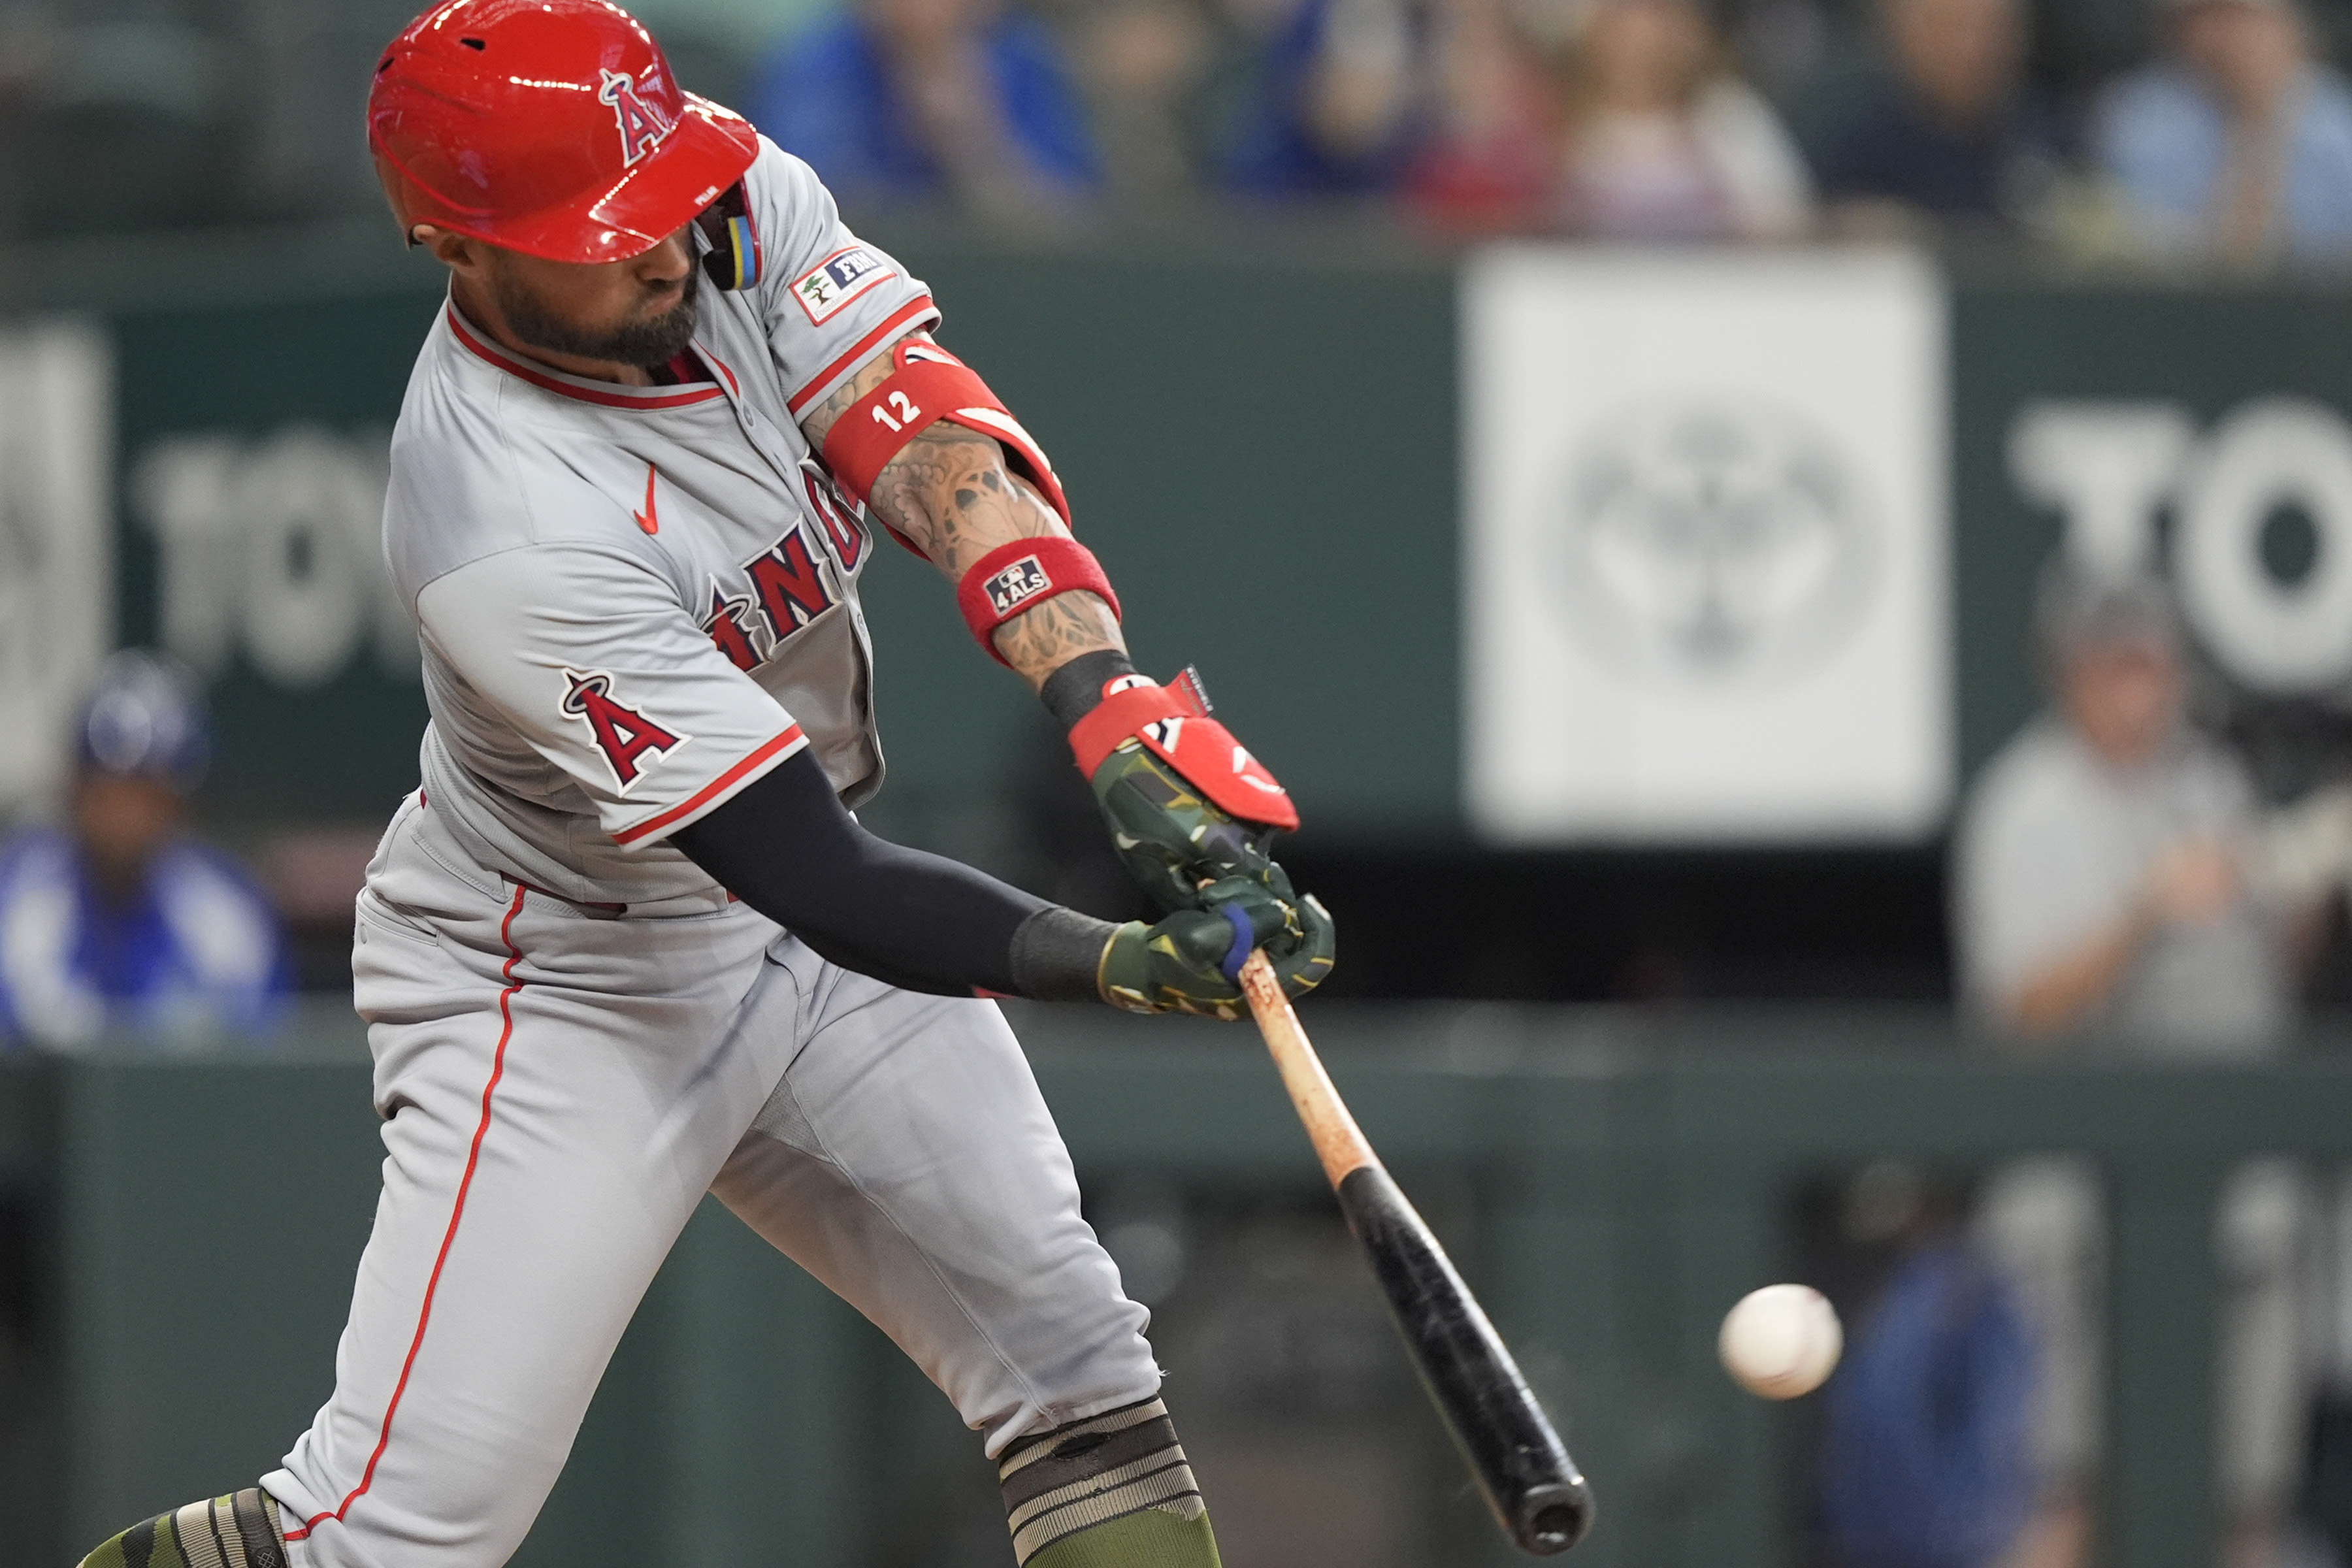 Kevin Pillar has a poetic moment, gets 1,000th career hit in Angels' win at Texas with parents there